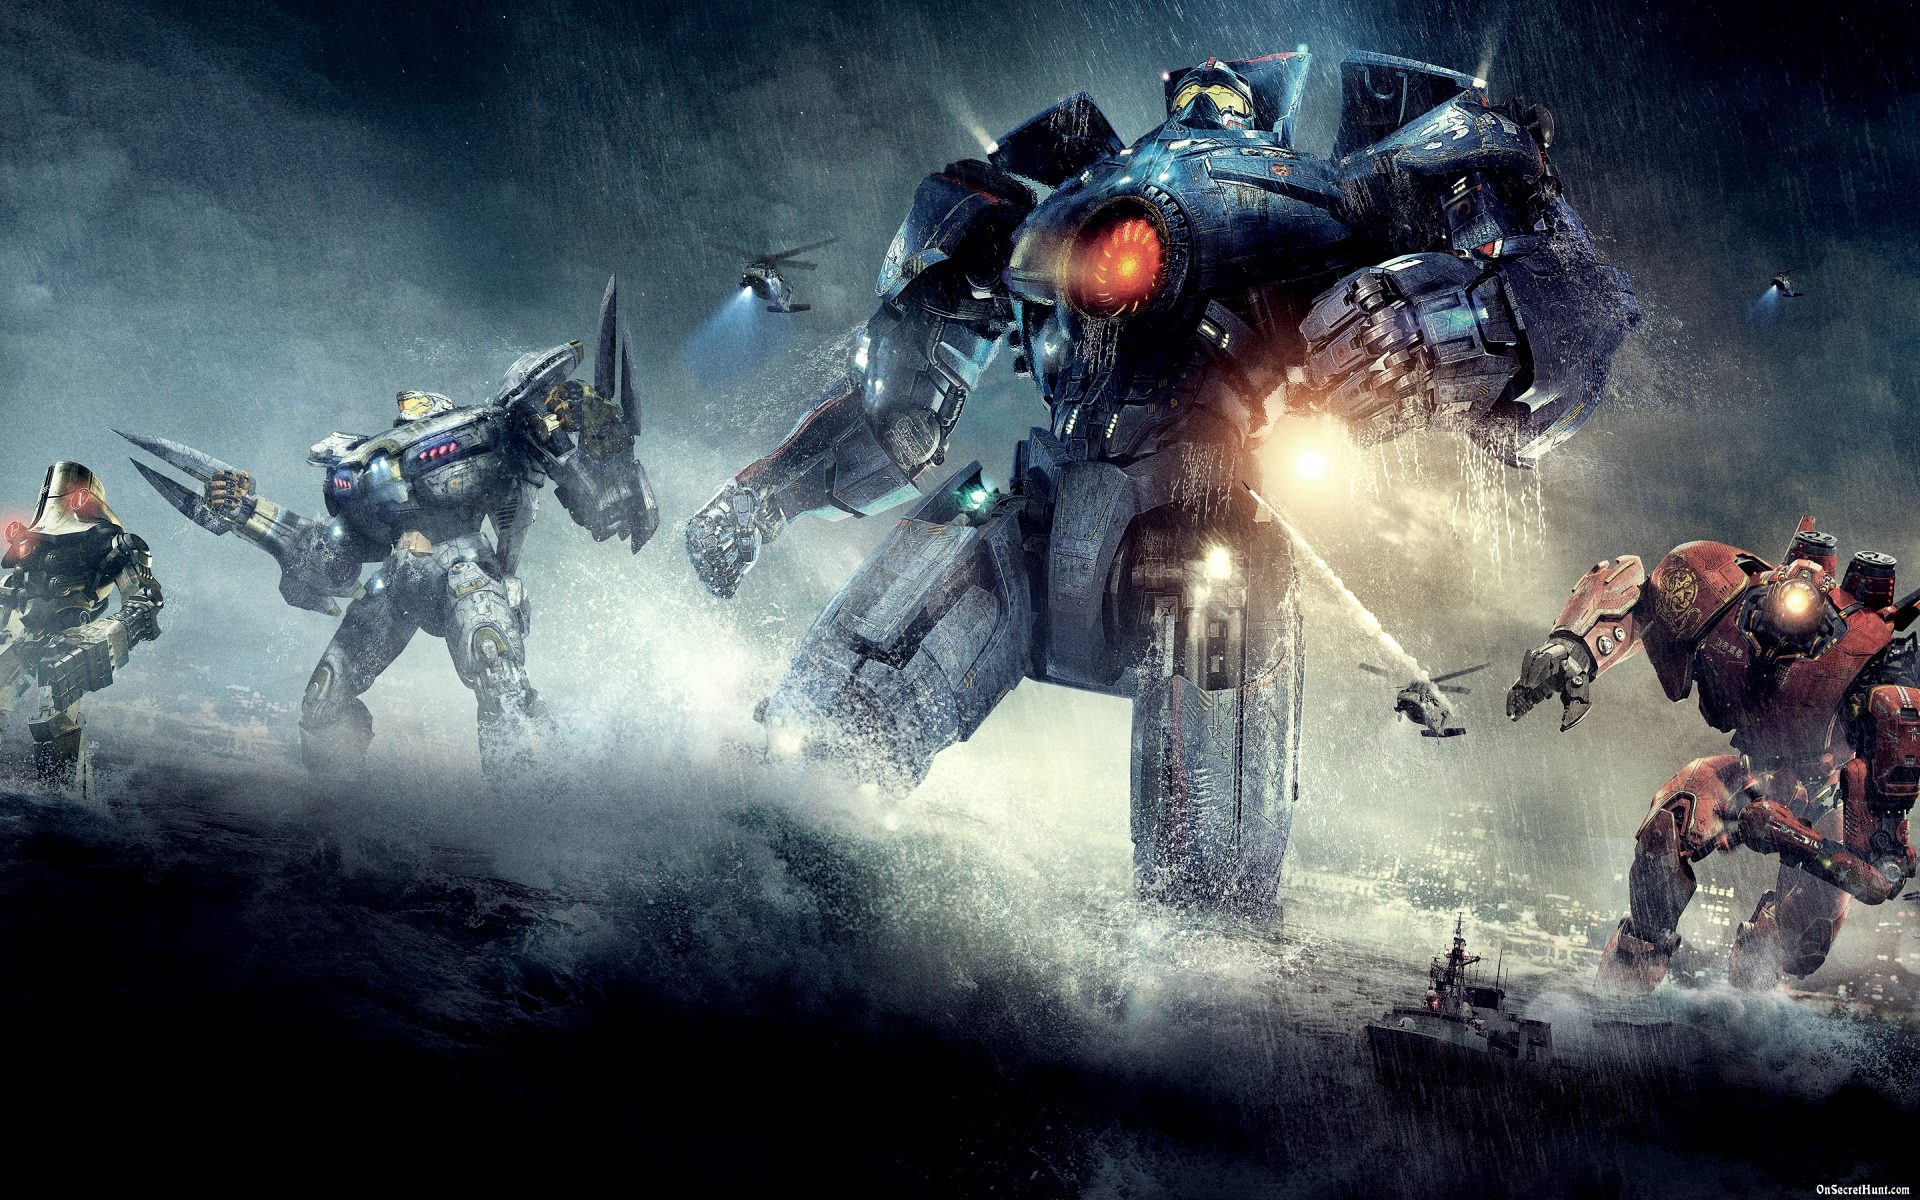 suitcase Coalescence Desolate Pacific Rim – Robots vs. Monsters :: All Things Andy Gavin